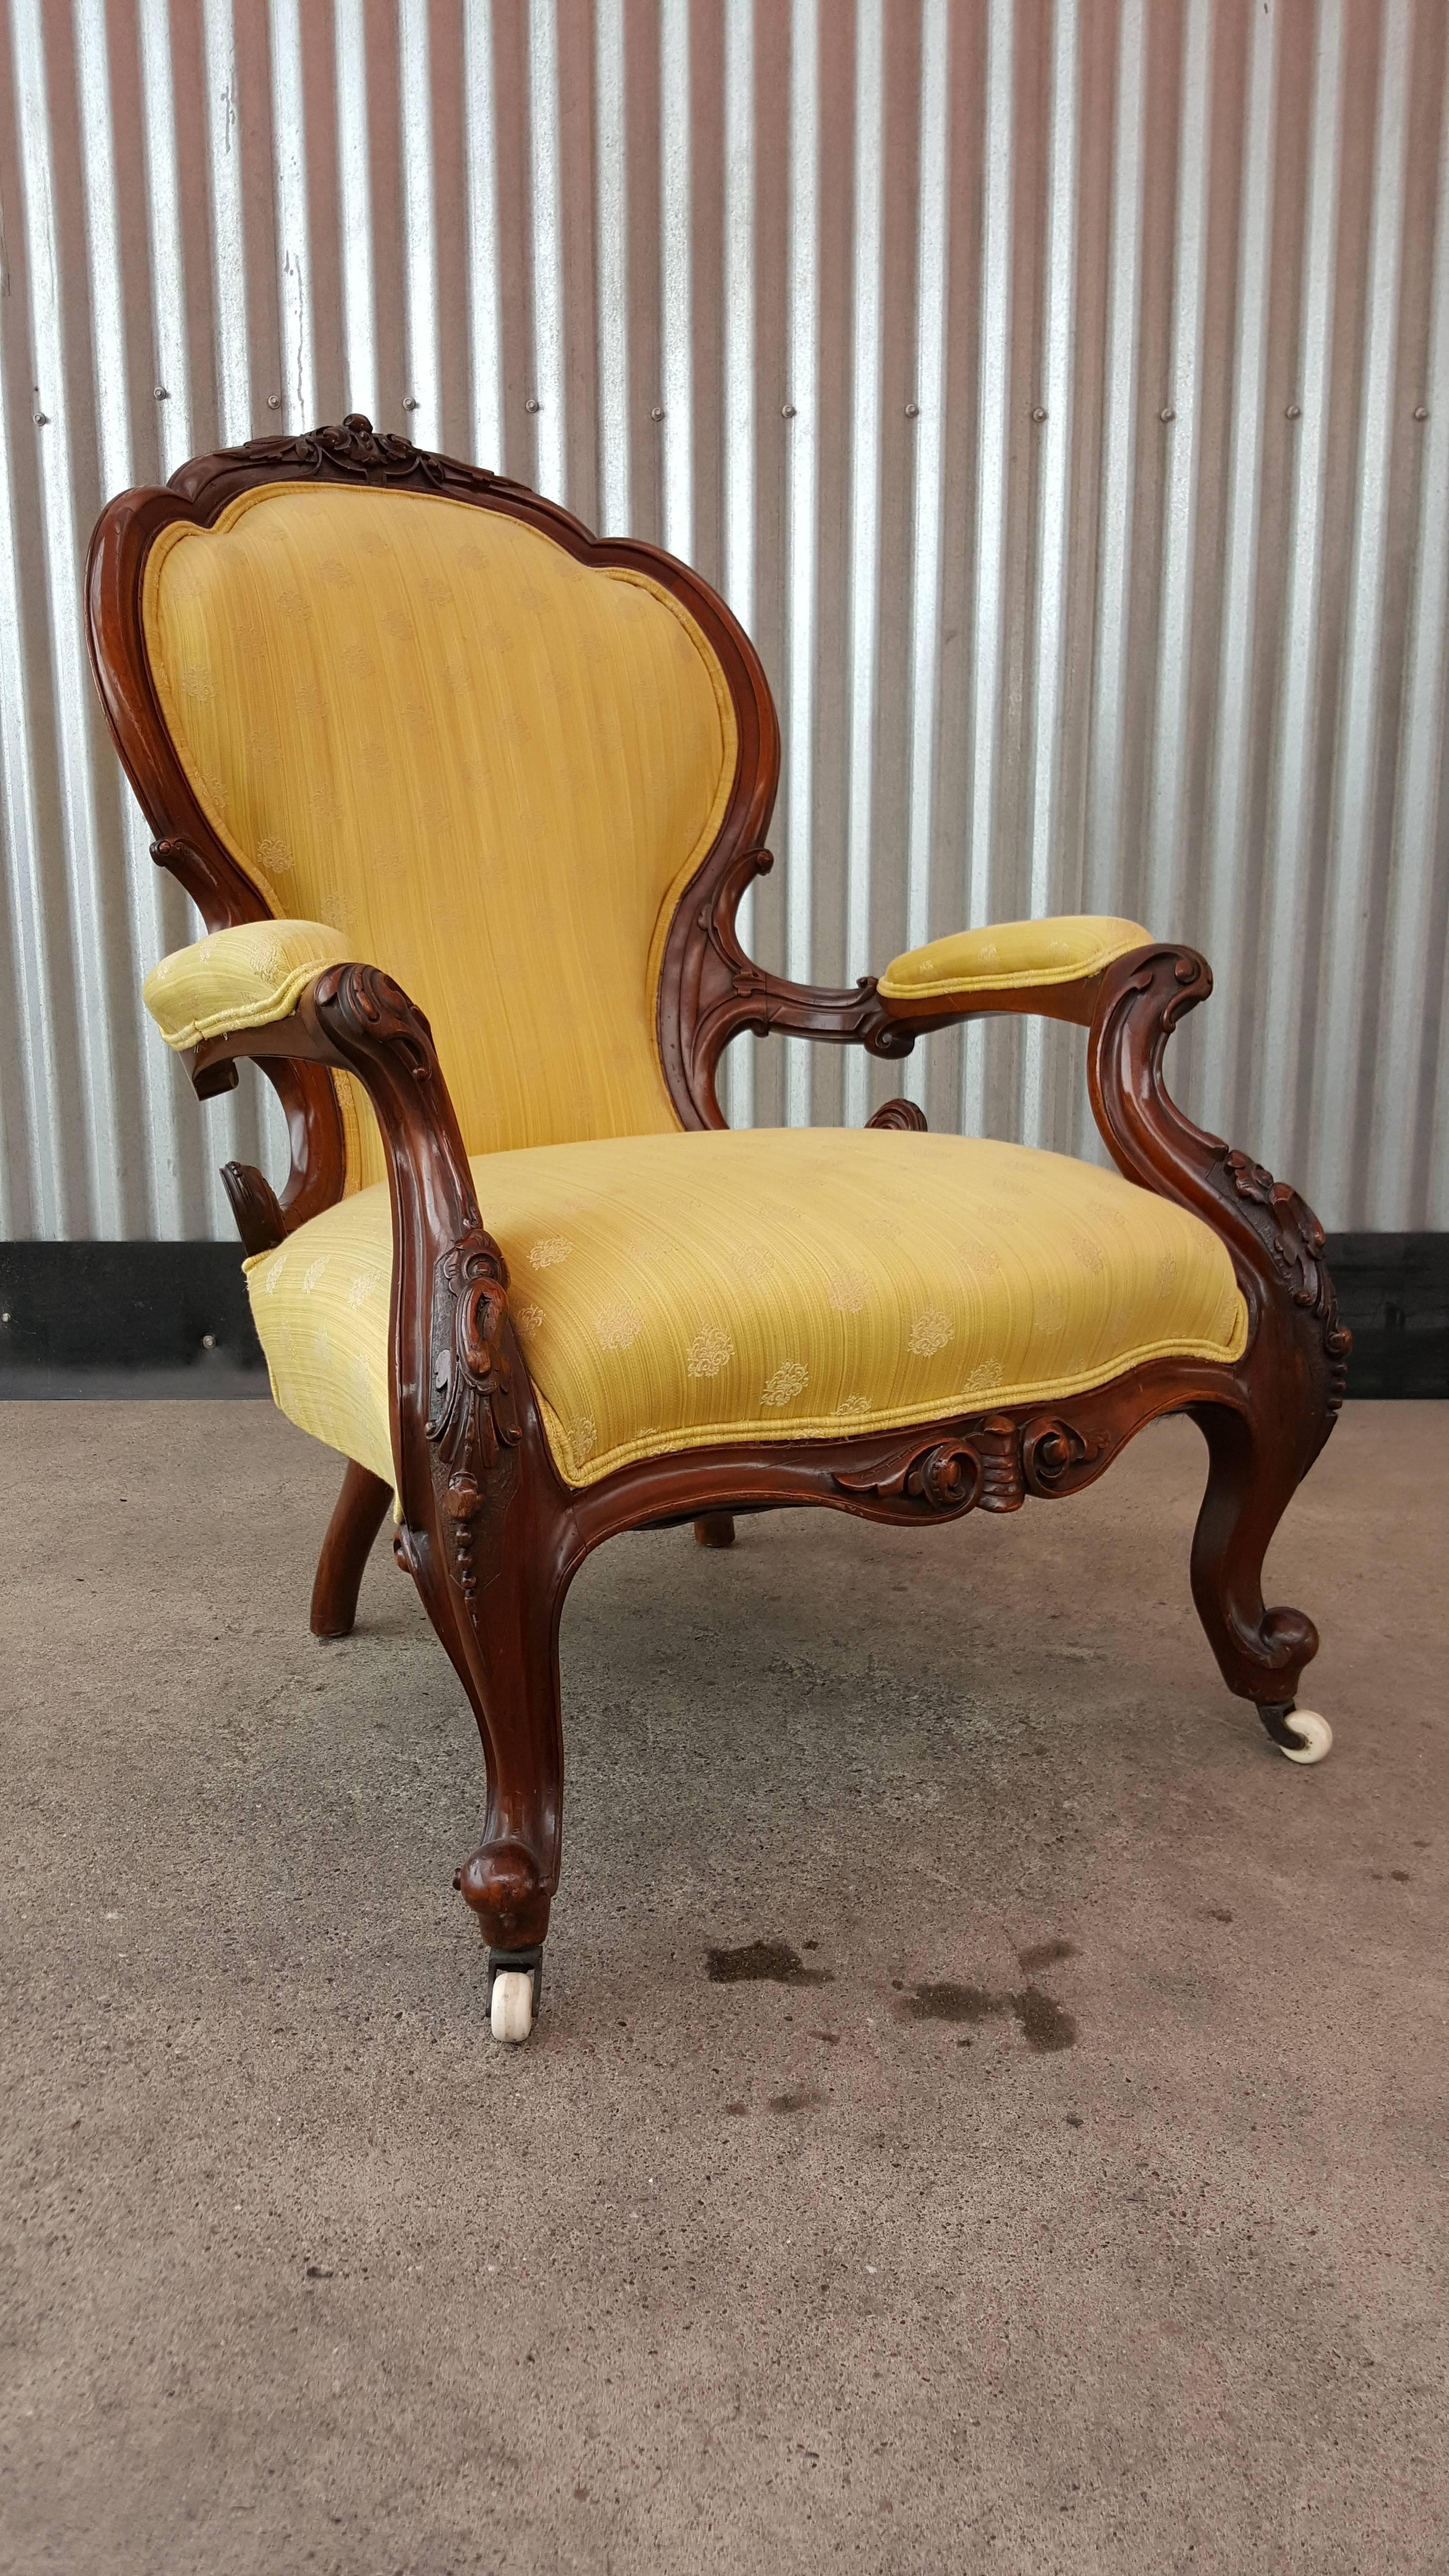 Fine craftsmanship and carved detail in this solid walnut armchair. Original porcelain casters. Beautiful patina and dramatic curves to solid walnut frame. Older re-upholstery is in good condition.